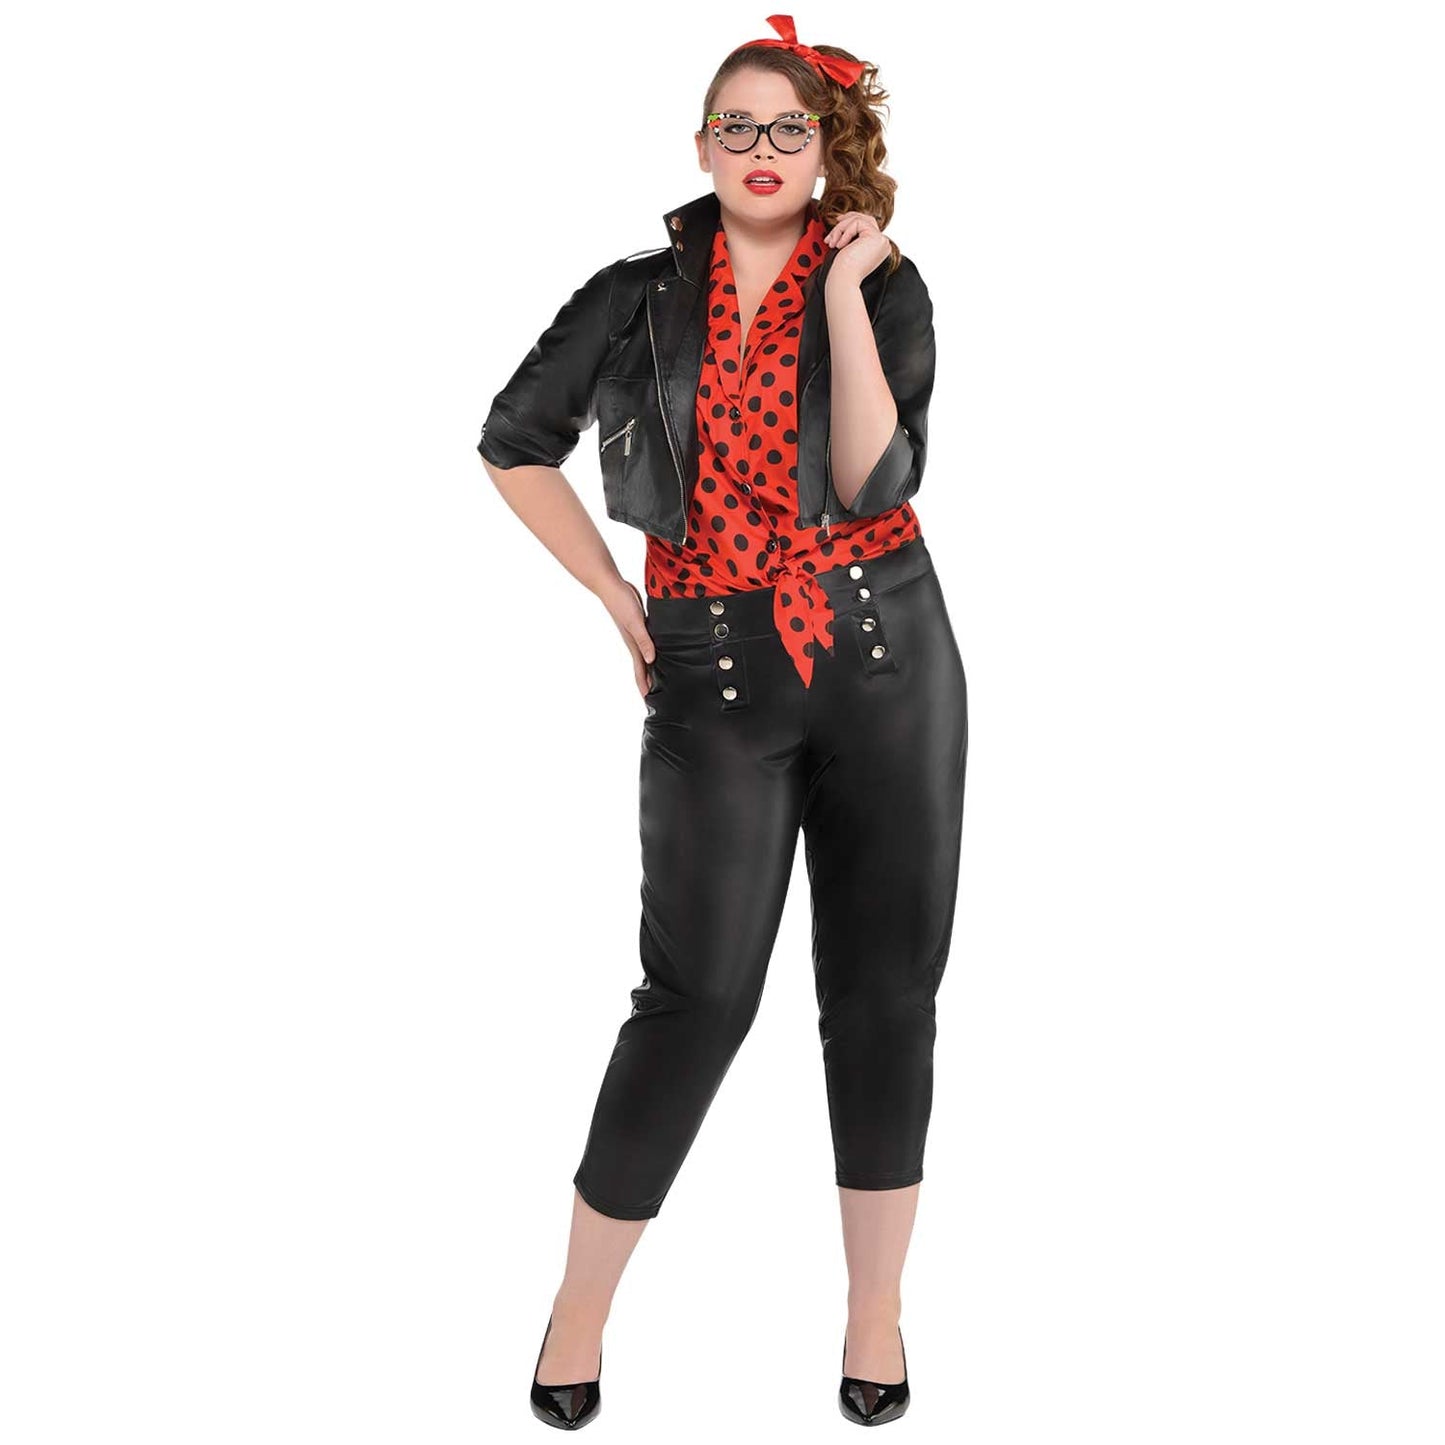 Ladies 1950s Rockin Rebel Rockabilly Costume includes shirt, headscarf, jacket and pants. The high-quality faux leather cropped jacket features a functional zipper and silver stud detailing. The polka dot shirt ties at the bottom to show just the right amount of skin. The black pedal pushers have decorative faux button detailing. Complete with a red headscarf.